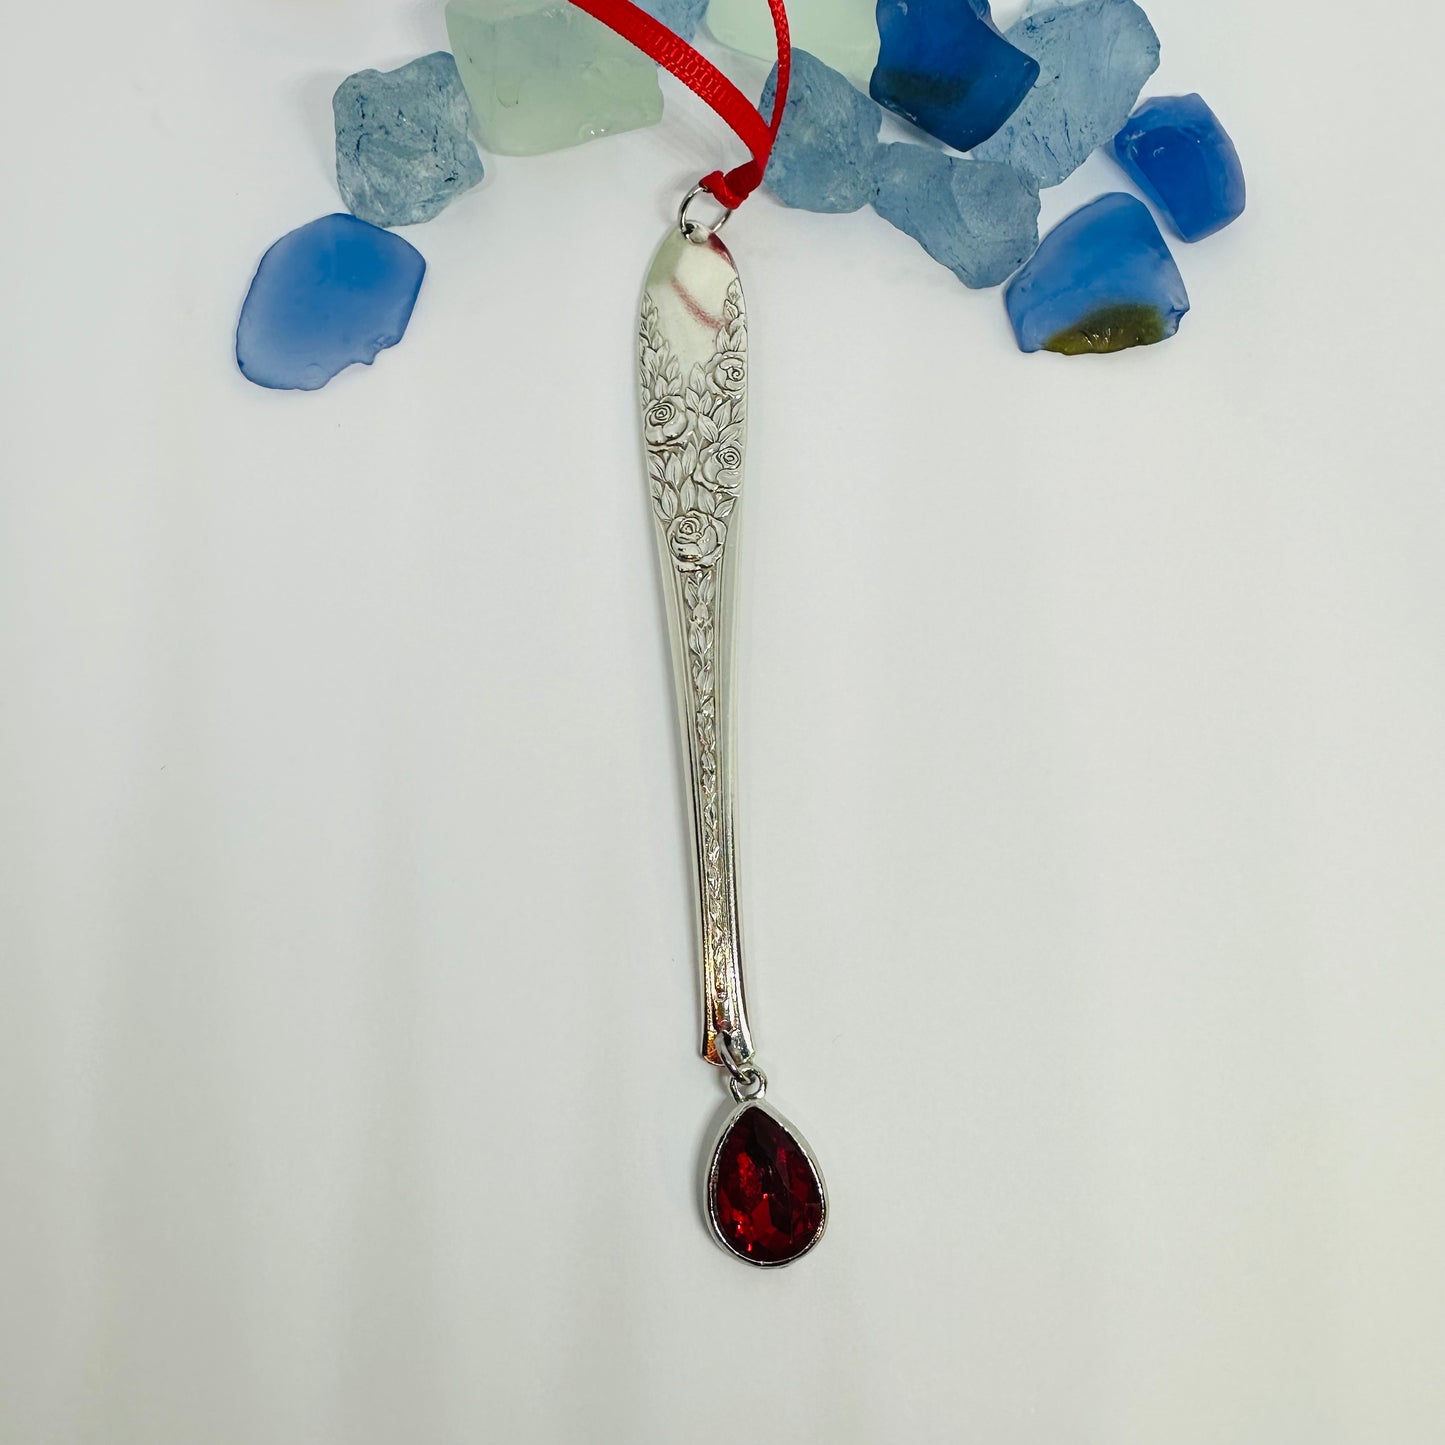 Vintage “Icicle” Ornaments | Limited Edition Holiday Window Tree Decor